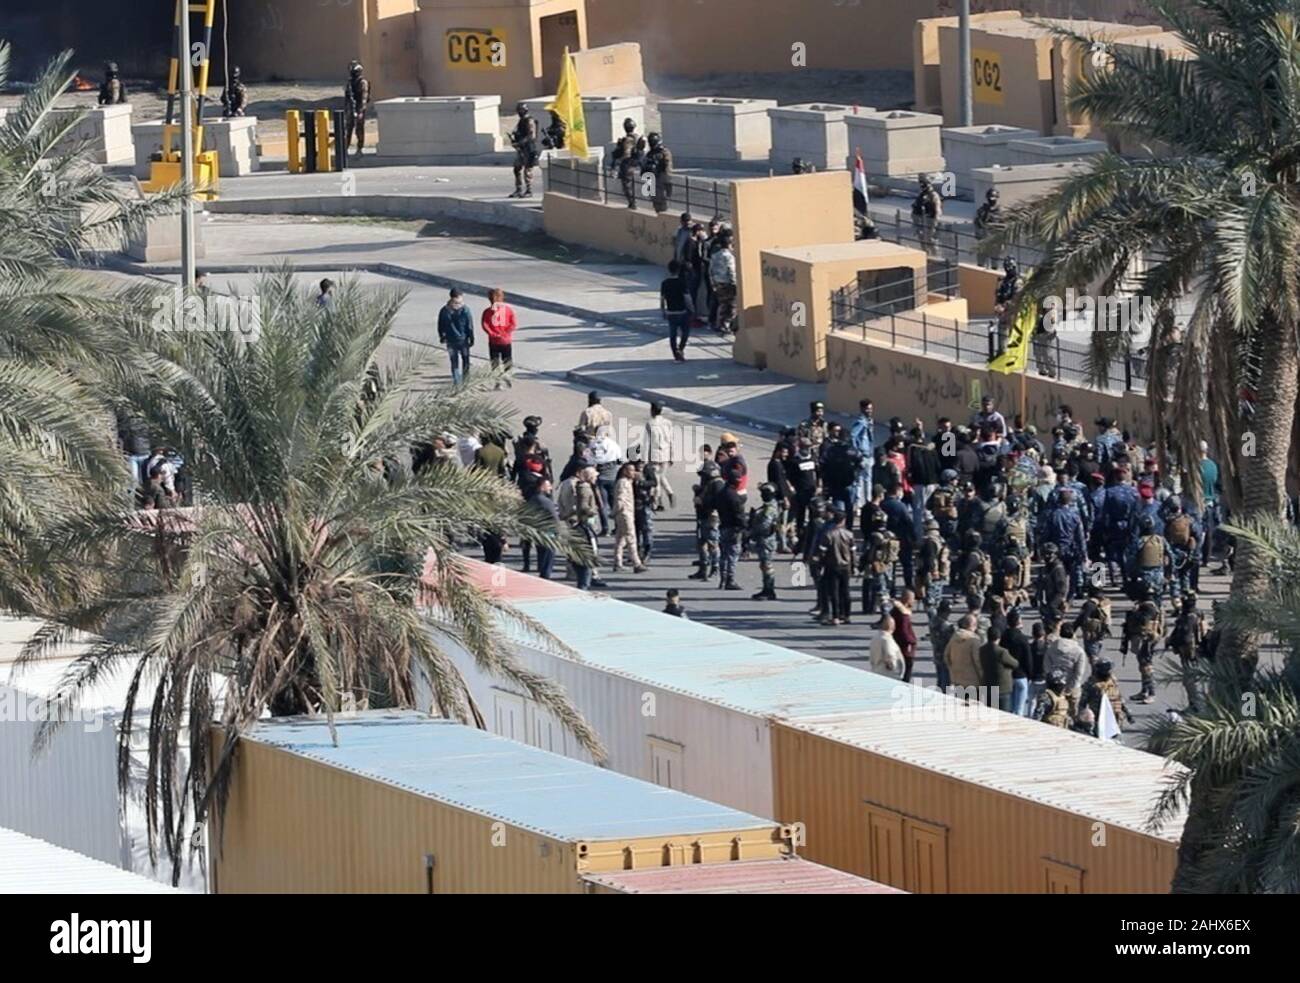 https://c8.alamy.com/comp/2AHX6EX/baghdad-iraq-01st-jan-2020-assailants-and-attackers-storm-the-entry-control-point-at-the-us-embassy-in-baghdad-iraq-on-january-1-2020-dozens-of-angry-iraqi-shiite-militia-supporters-broke-into-the-us-embassy-compound-in-baghdad-on-tuesday-december-31-2019-after-smashing-a-main-door-and-setting-fire-to-a-reception-area-photo-by-maj-charlie-dietzus-armyupi-credit-upialamy-live-news-2AHX6EX.jpg